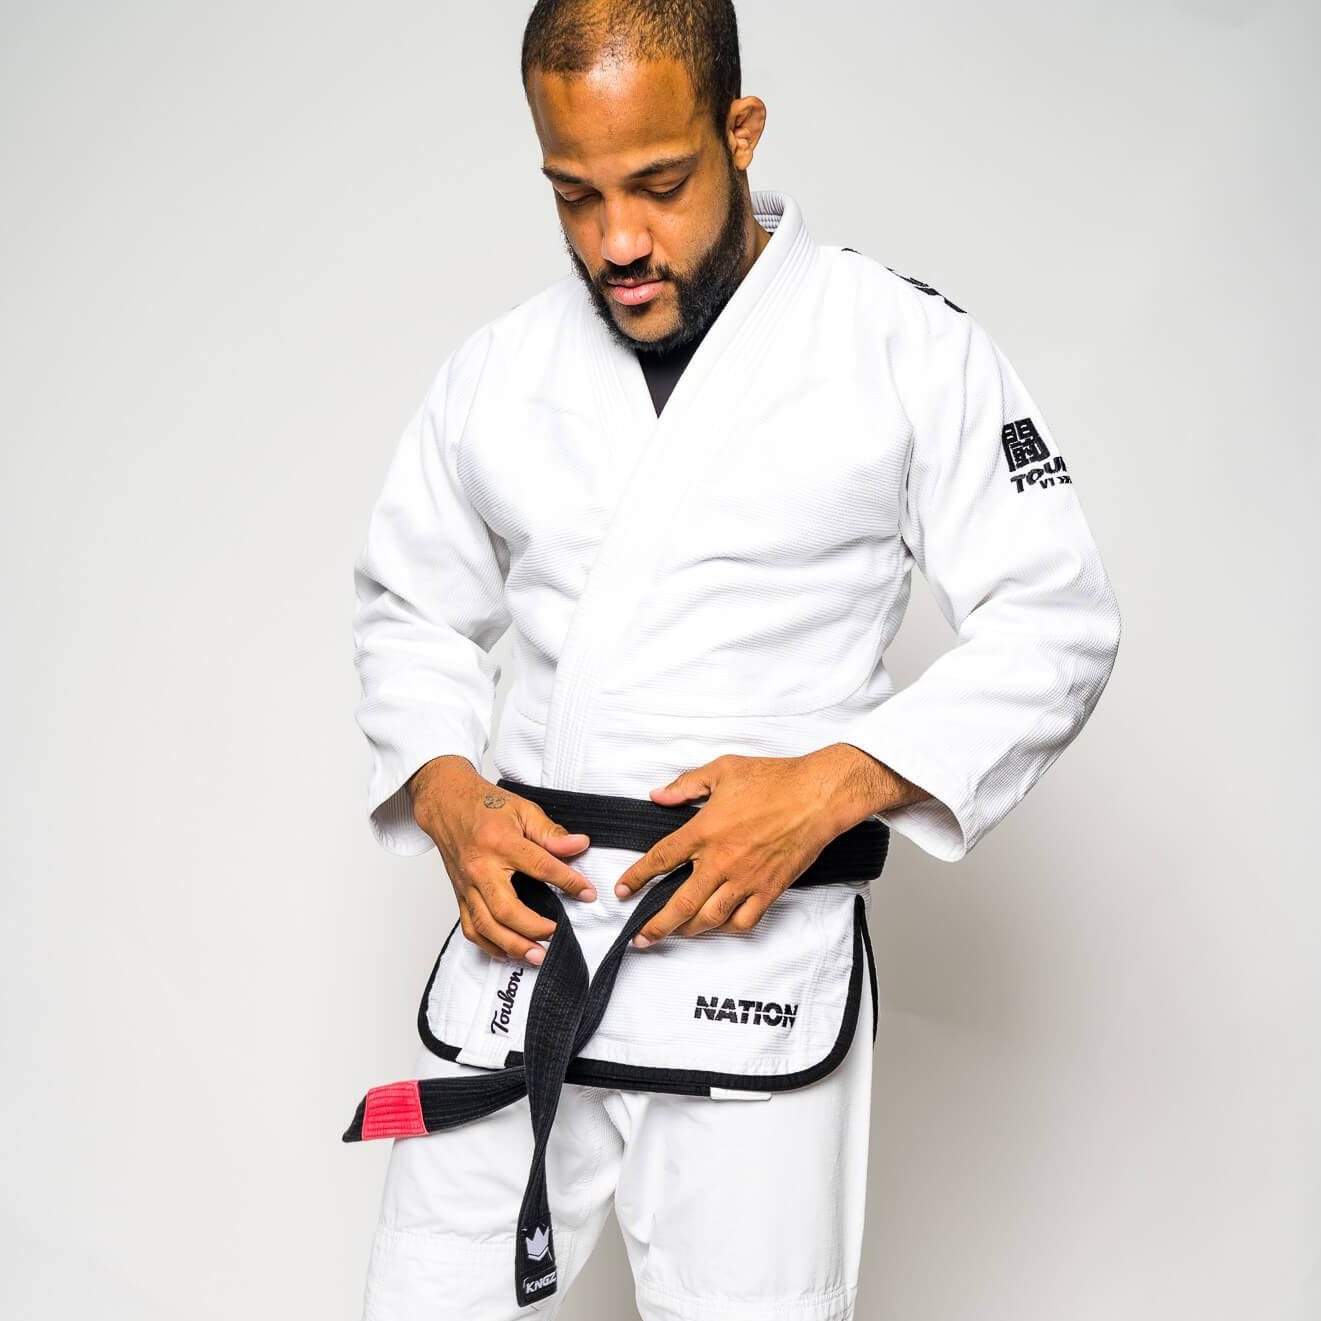 Just started gi bjj but my academy is having a no gi seminar this saturday,  is this attire proper enough? : r/bjj